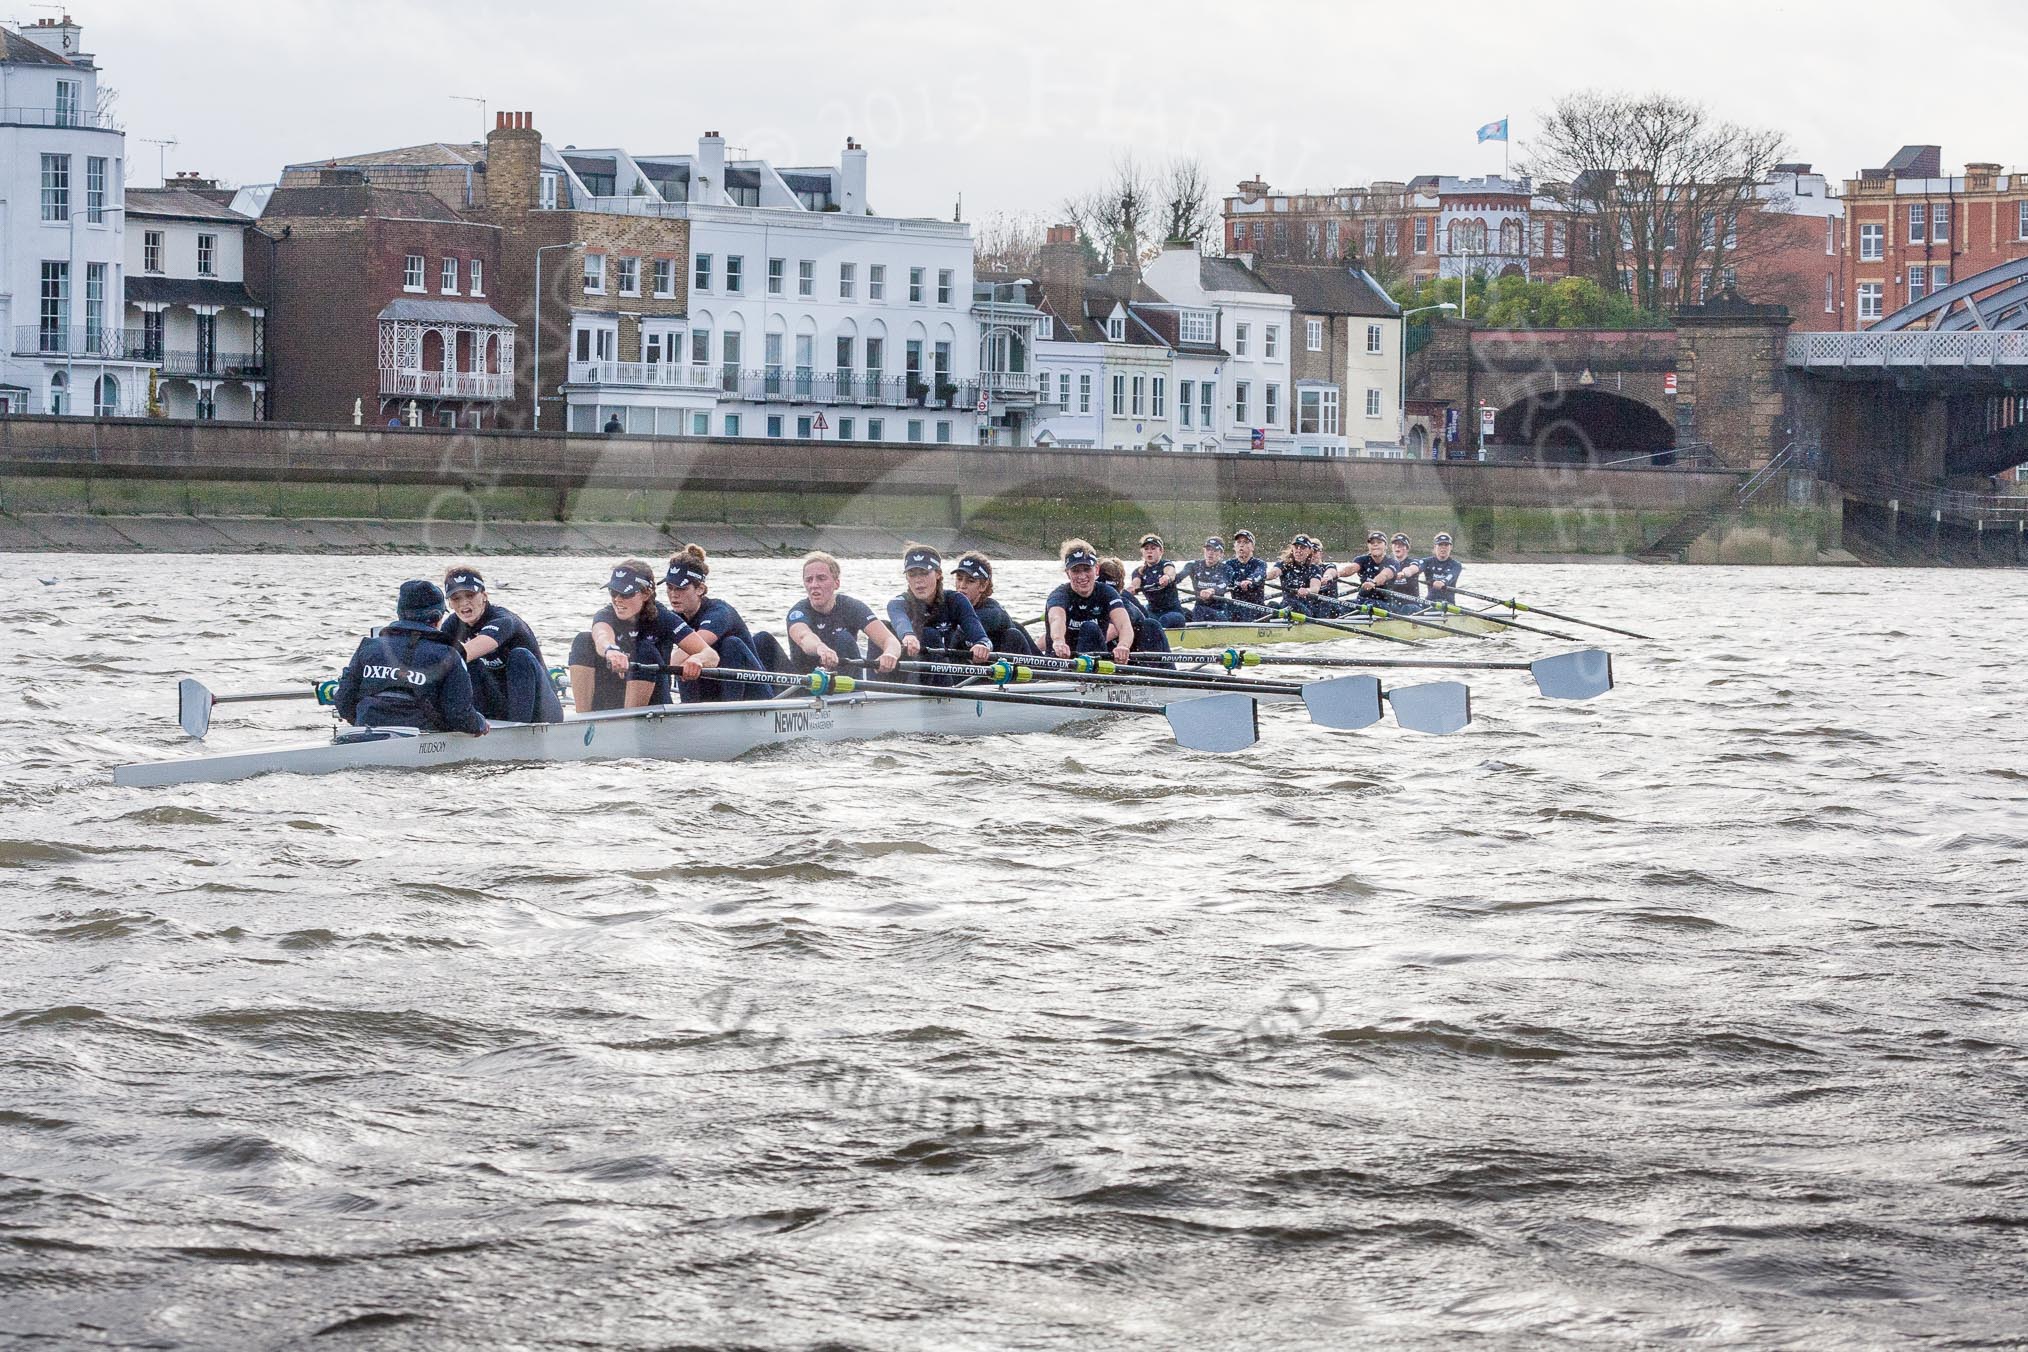 The Boat Race season 2016 - Women's Boat Race Trial Eights (OUWBC, Oxford): "Scylla" and "Charybdis" approaching Barnes Railway Bridge, with "Charybdis" in the lead.
River Thames between Putney Bridge and Mortlake,
London SW15,

United Kingdom,
on 10 December 2015 at 12:33, image #287